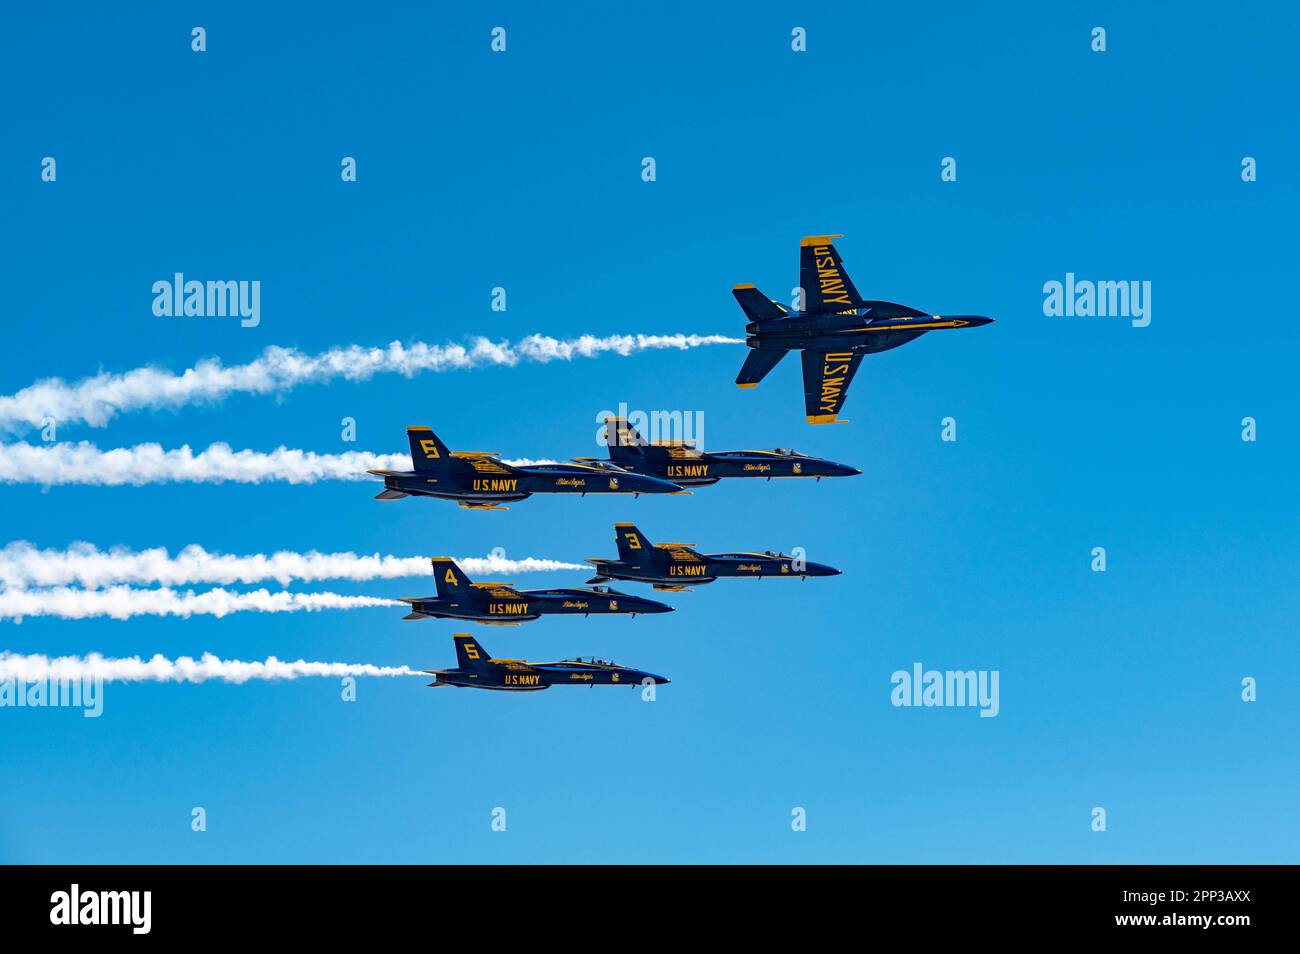 Cmdr. Alexander P. Armatas, flight leader of the U.S. Navy Blue Angels, performs a pitch-up break during the final pass of the Blue Angels performance at the Southernmost Air Spectacular Air Show at Naval Air Station Key West, Fla. April 15, 2023. To close their show, the Blue Angels break away from their delta formation one-by-one as they prepare to land. (U.S. Air Force photo by Staff Sgt. Caleb Roland) Stock Photo